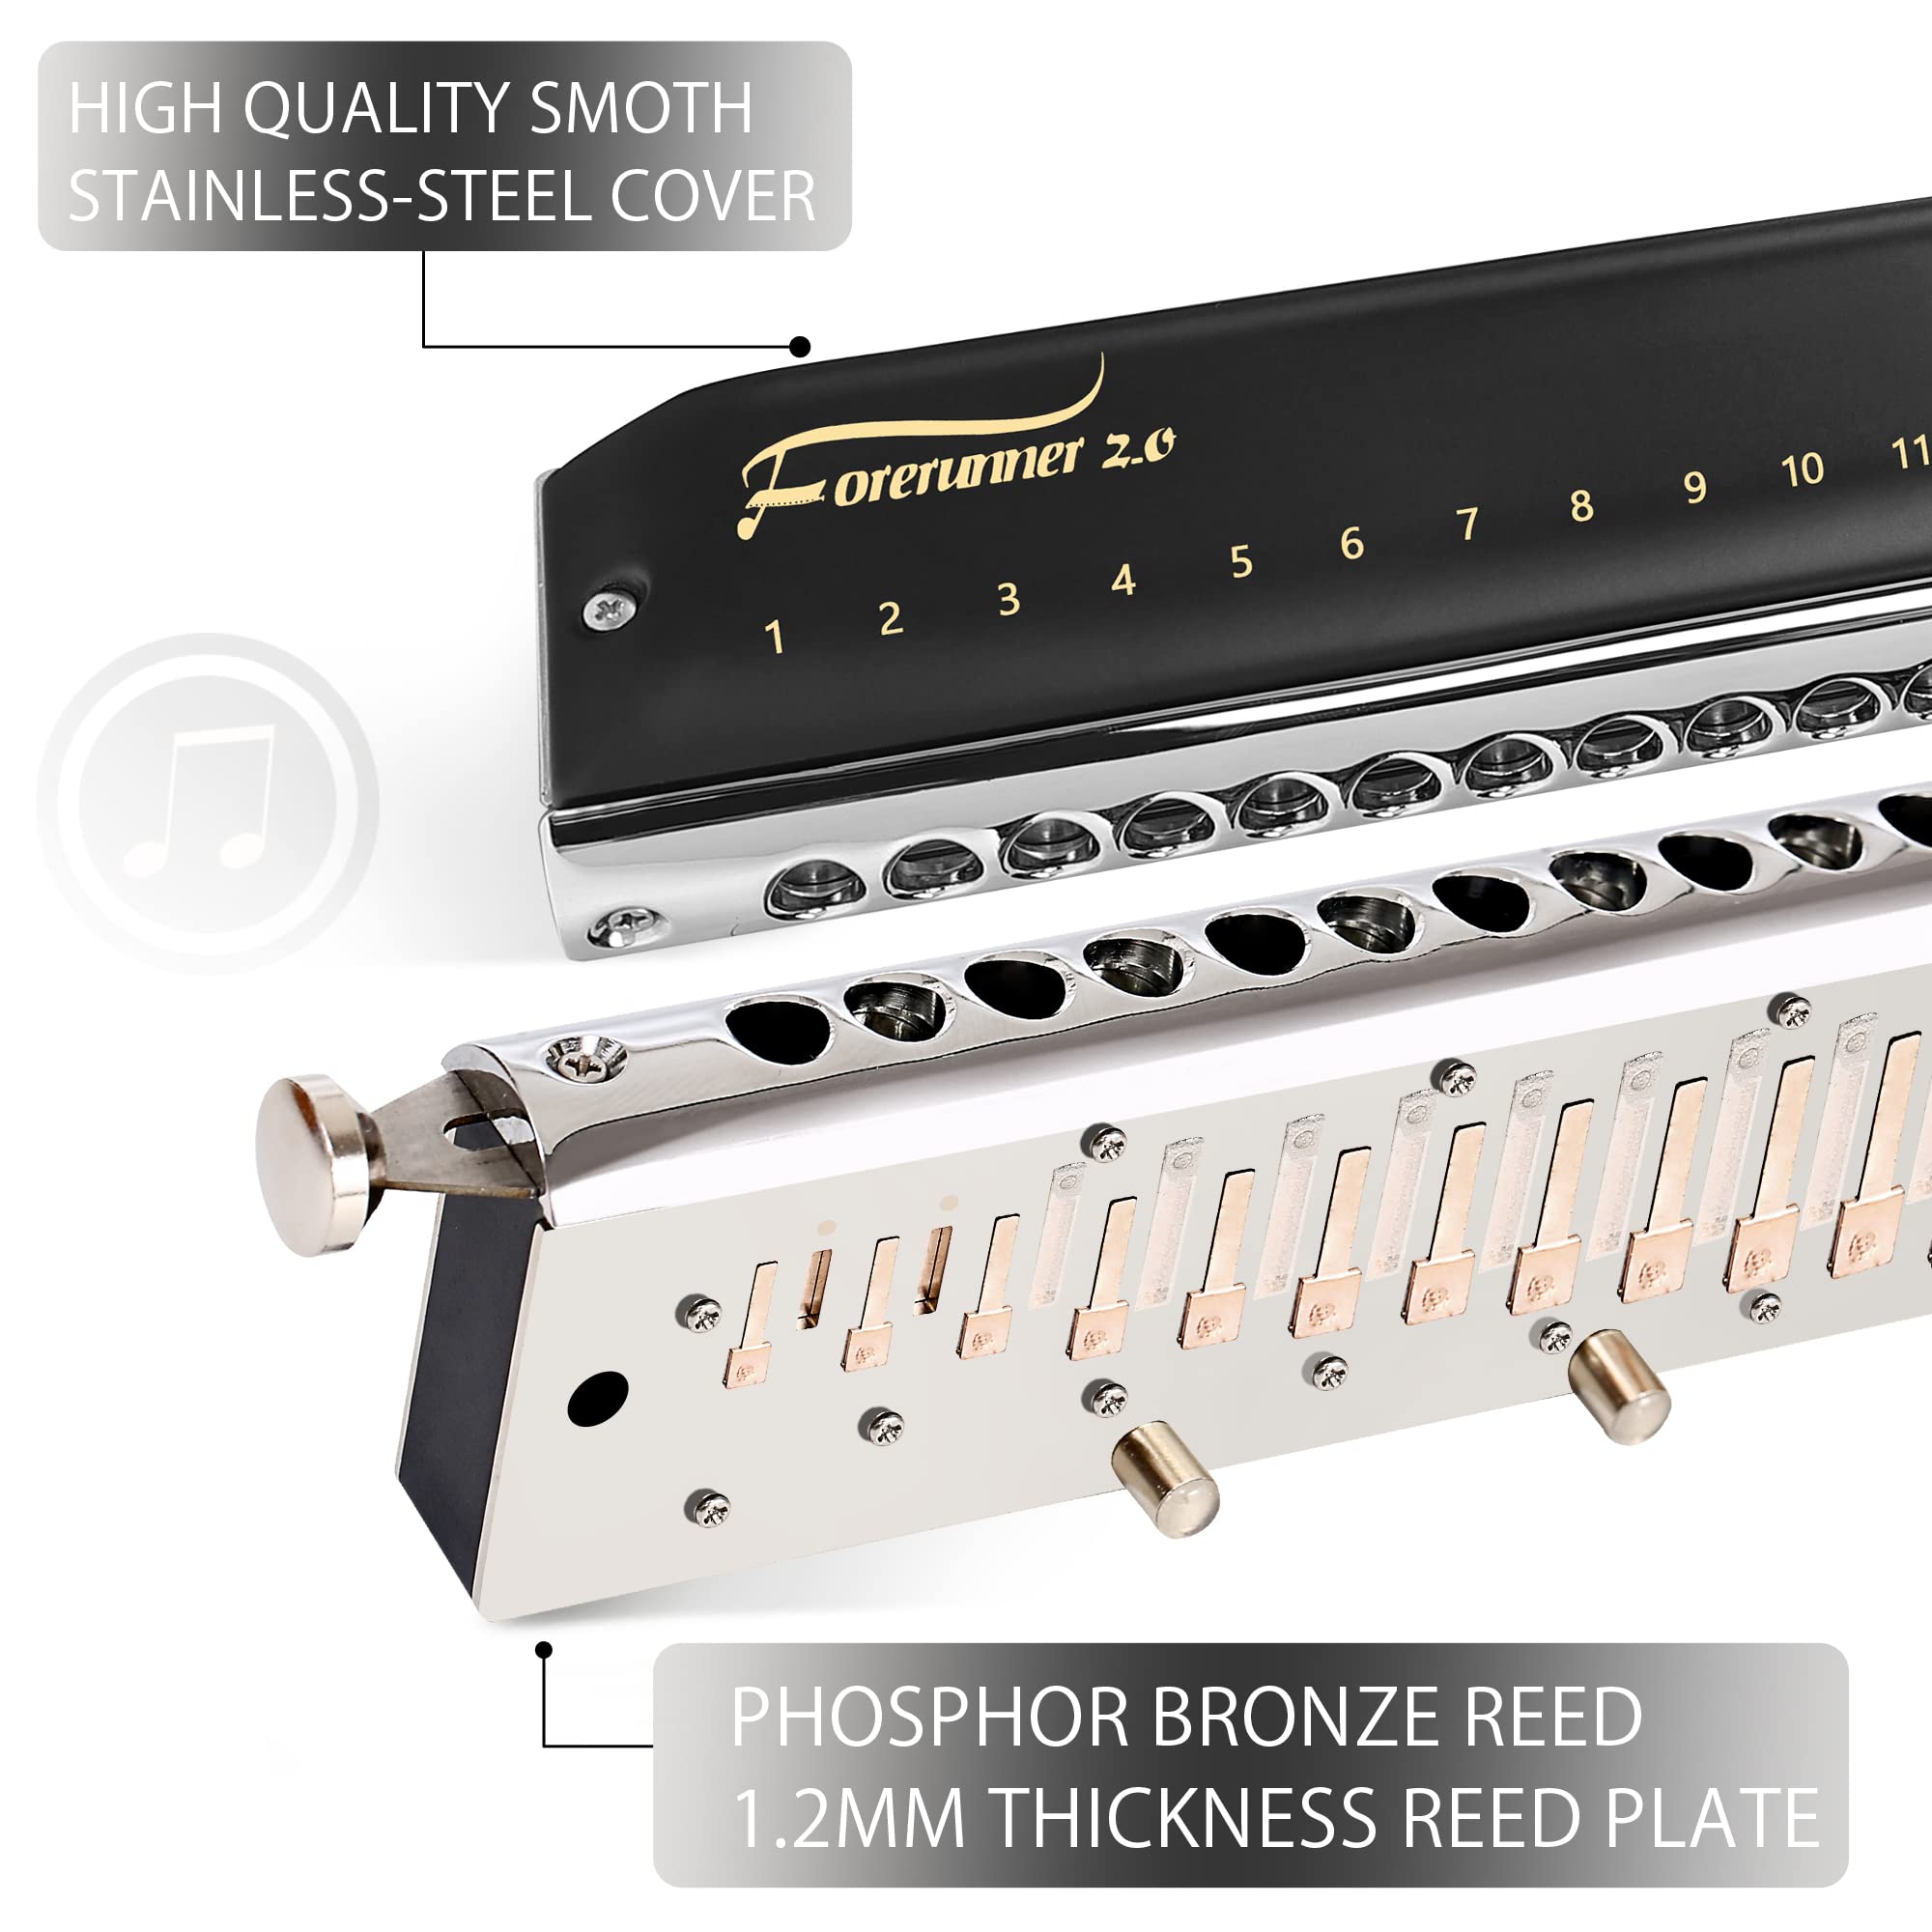 EAST TOP Updated FORERUNNER 2.0 without valves Chromatic Harmonica